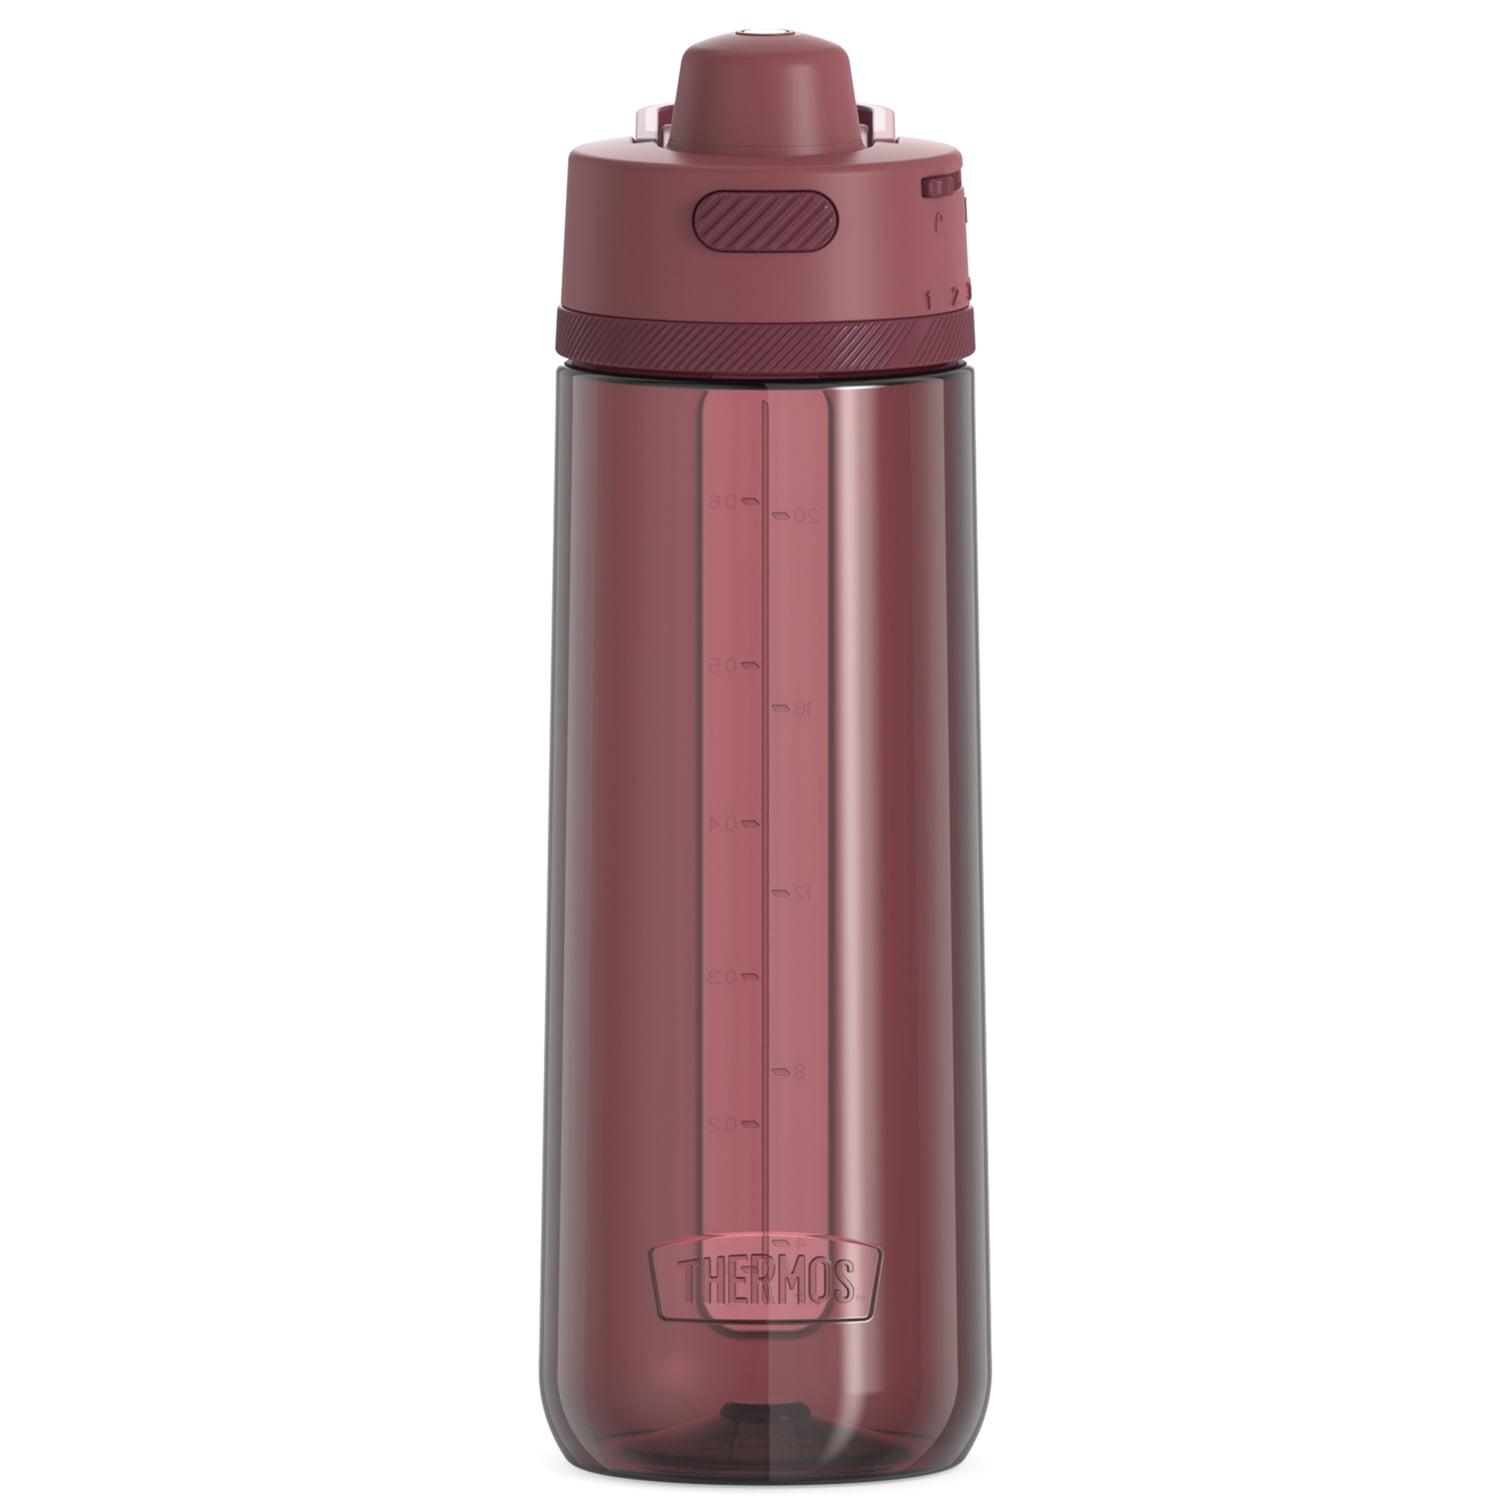 12 Can/13 L Thermos Essentials Cooler Burgundy 